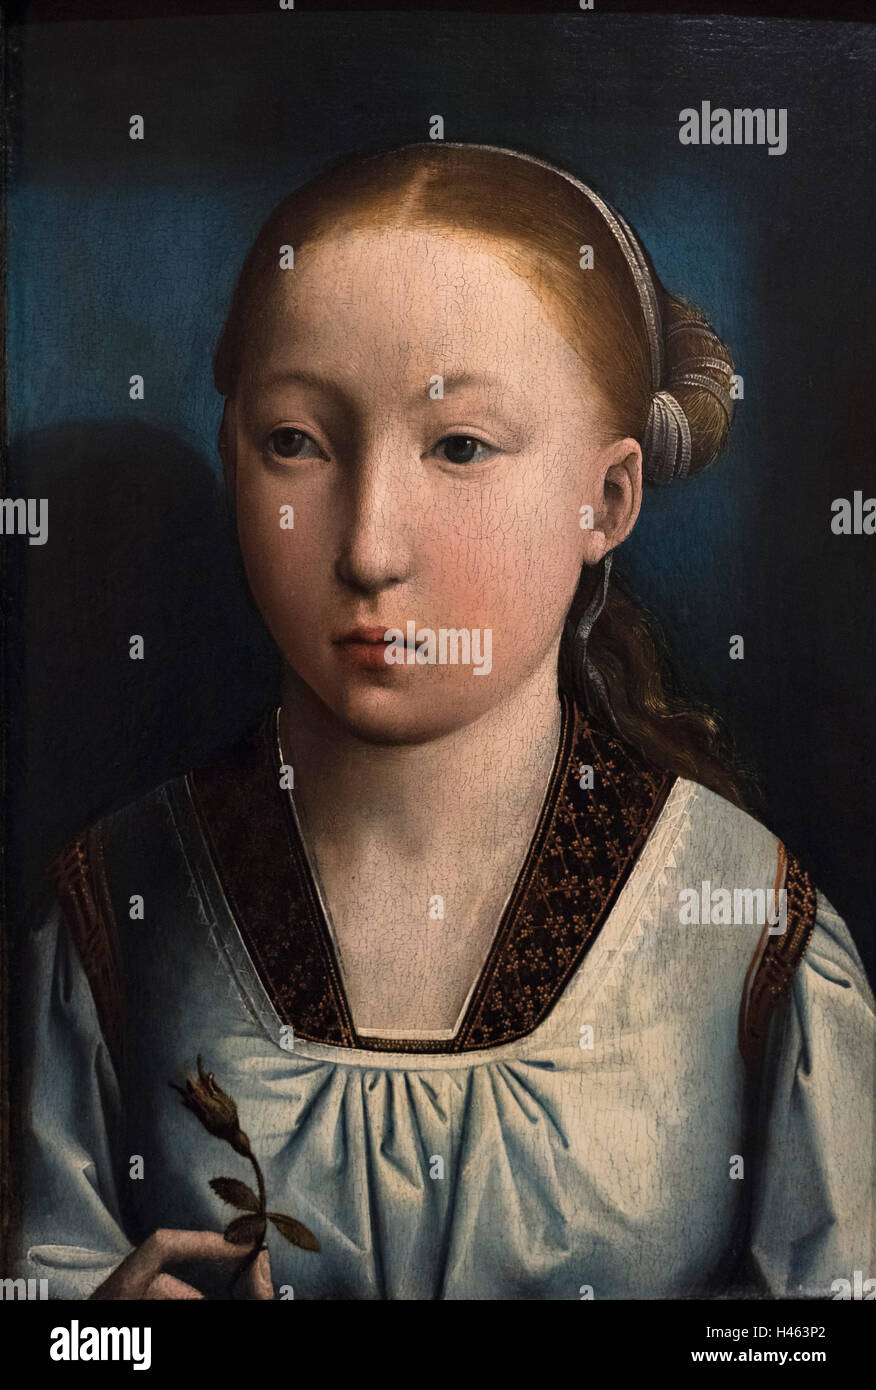 Juan de Flandes (active 1496-1519), Portrait of a Child (thought to be 11 year old Infanta Catalina, Catherine of Aragon) Stock Photo